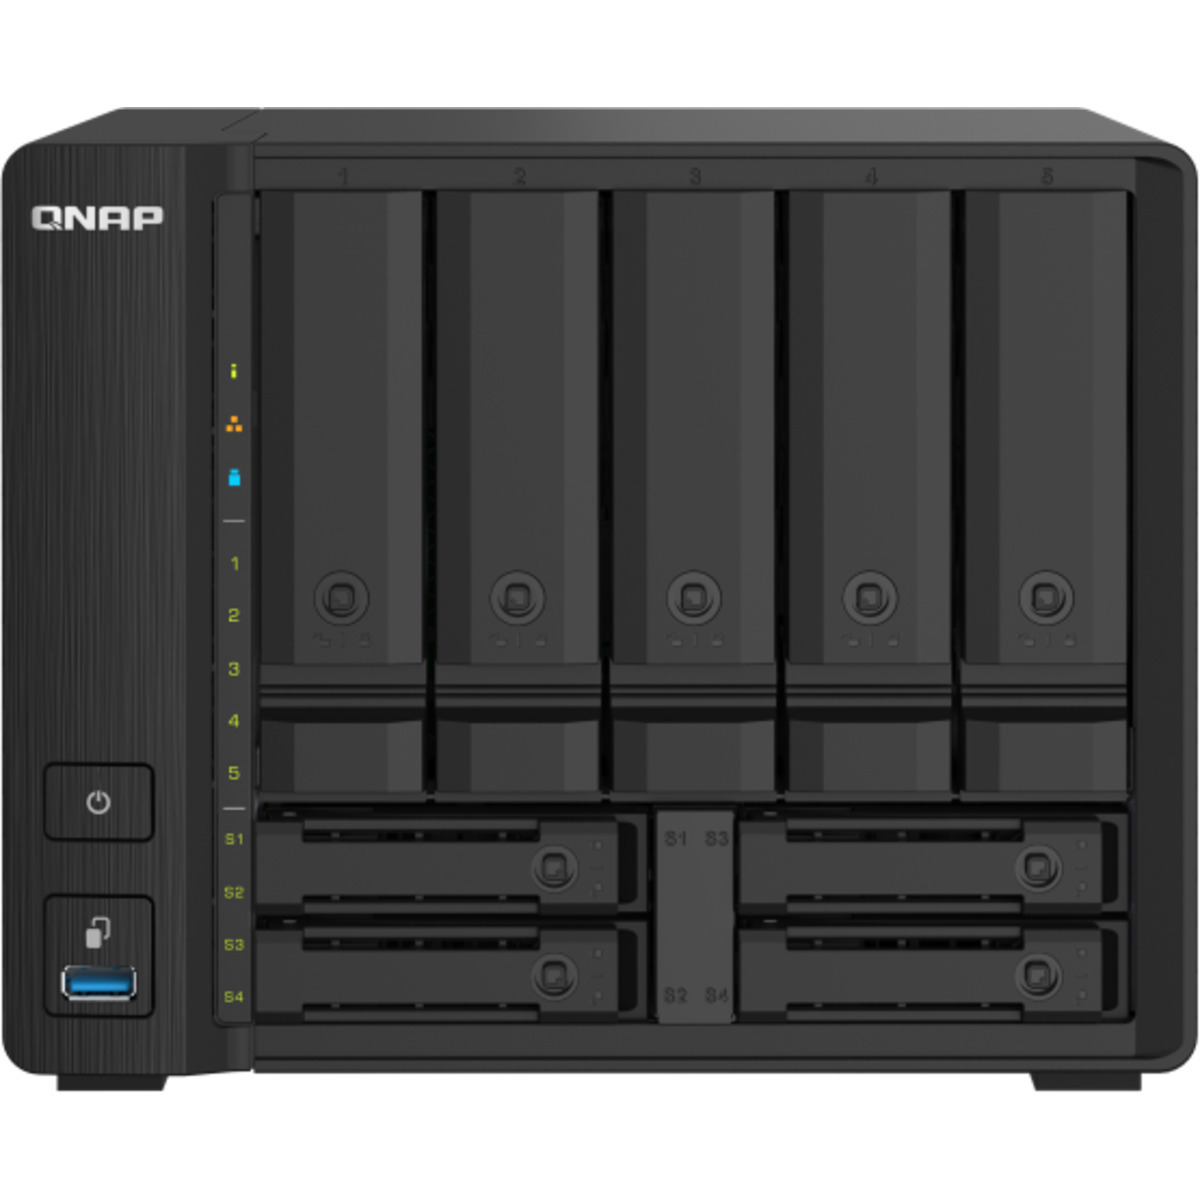 QNAP TS-932PX 12tb 5+4-Bay Desktop Multimedia / Power User / Business NAS - Network Attached Storage Device 3x4tb Samsung 870 QVO MZ-77Q4T0 2.5 560/530MB/s SATA 6Gb/s SSD CONSUMER Class Drives Installed - Burn-In Tested - FREE RAM UPGRADE TS-932PX